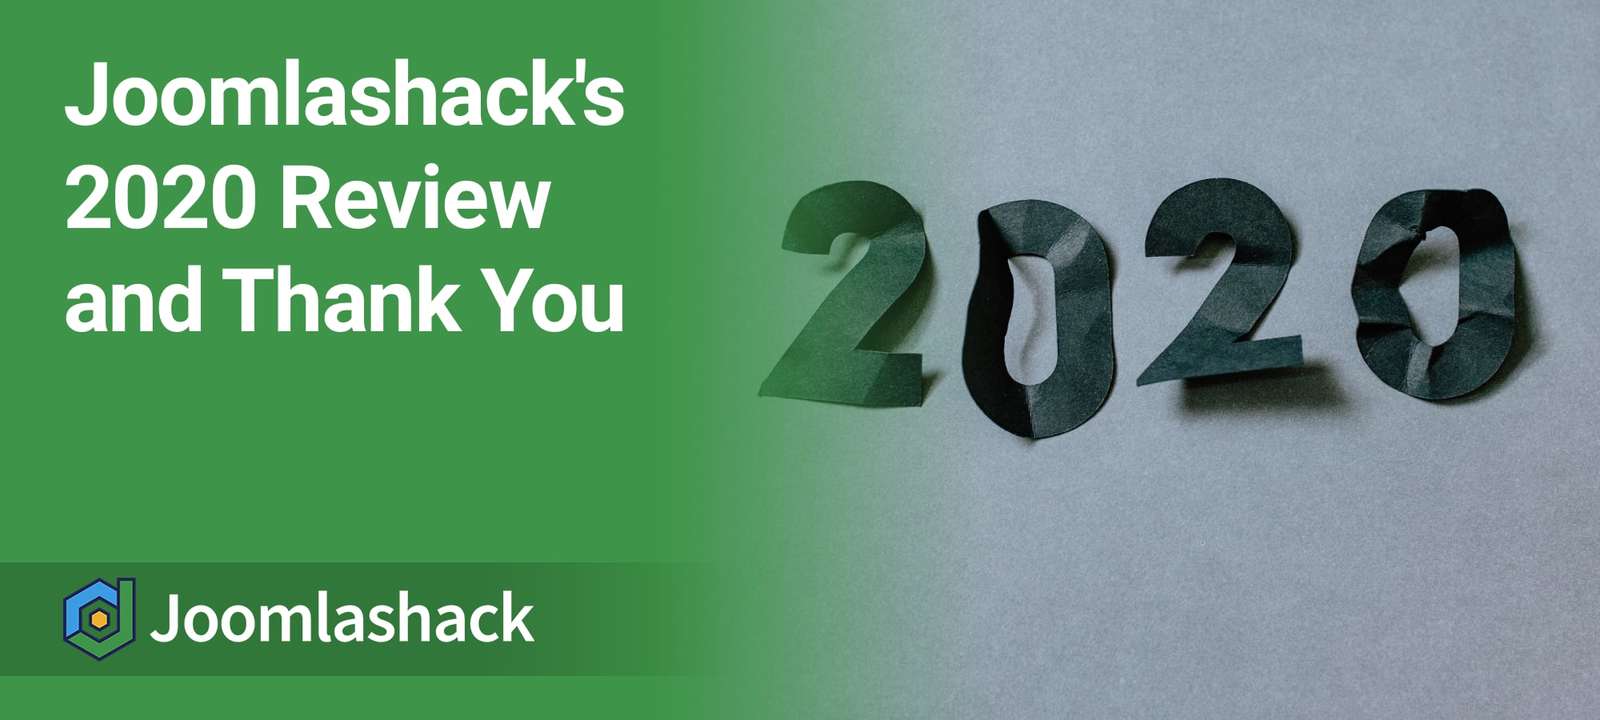 Joomlashack's 2020 Review and Thank You